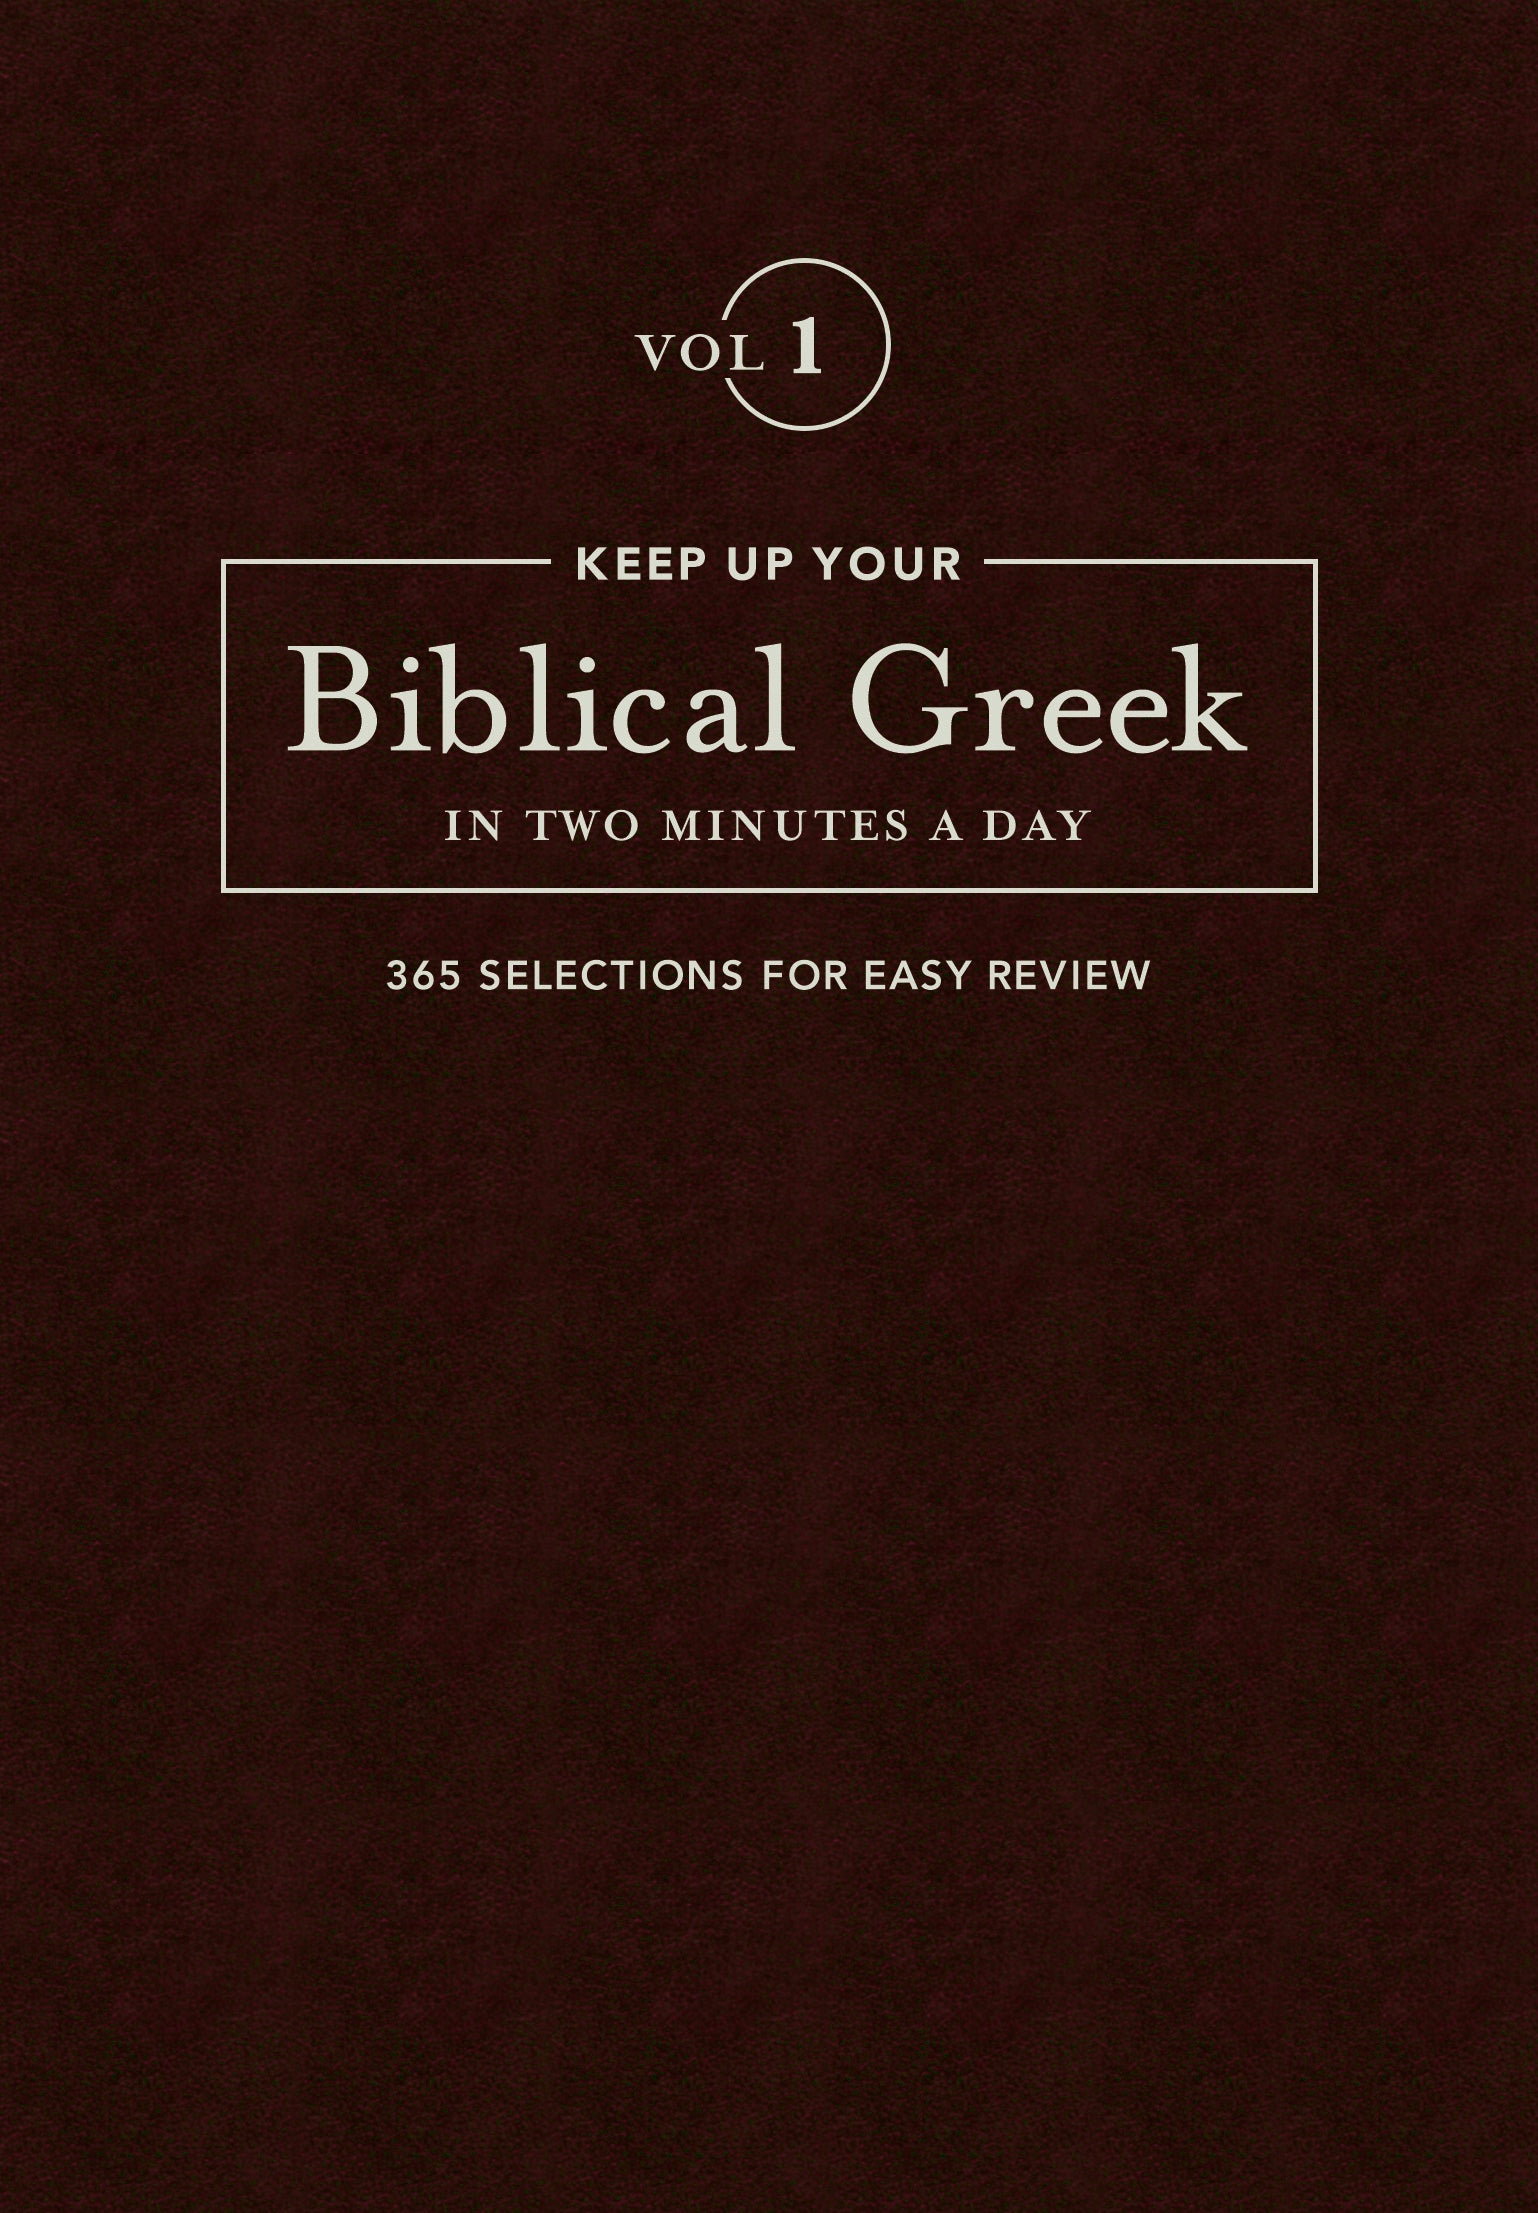 Image of Keep Up Your Biblical Greek In Two Minutes A Day Vol. 1 other